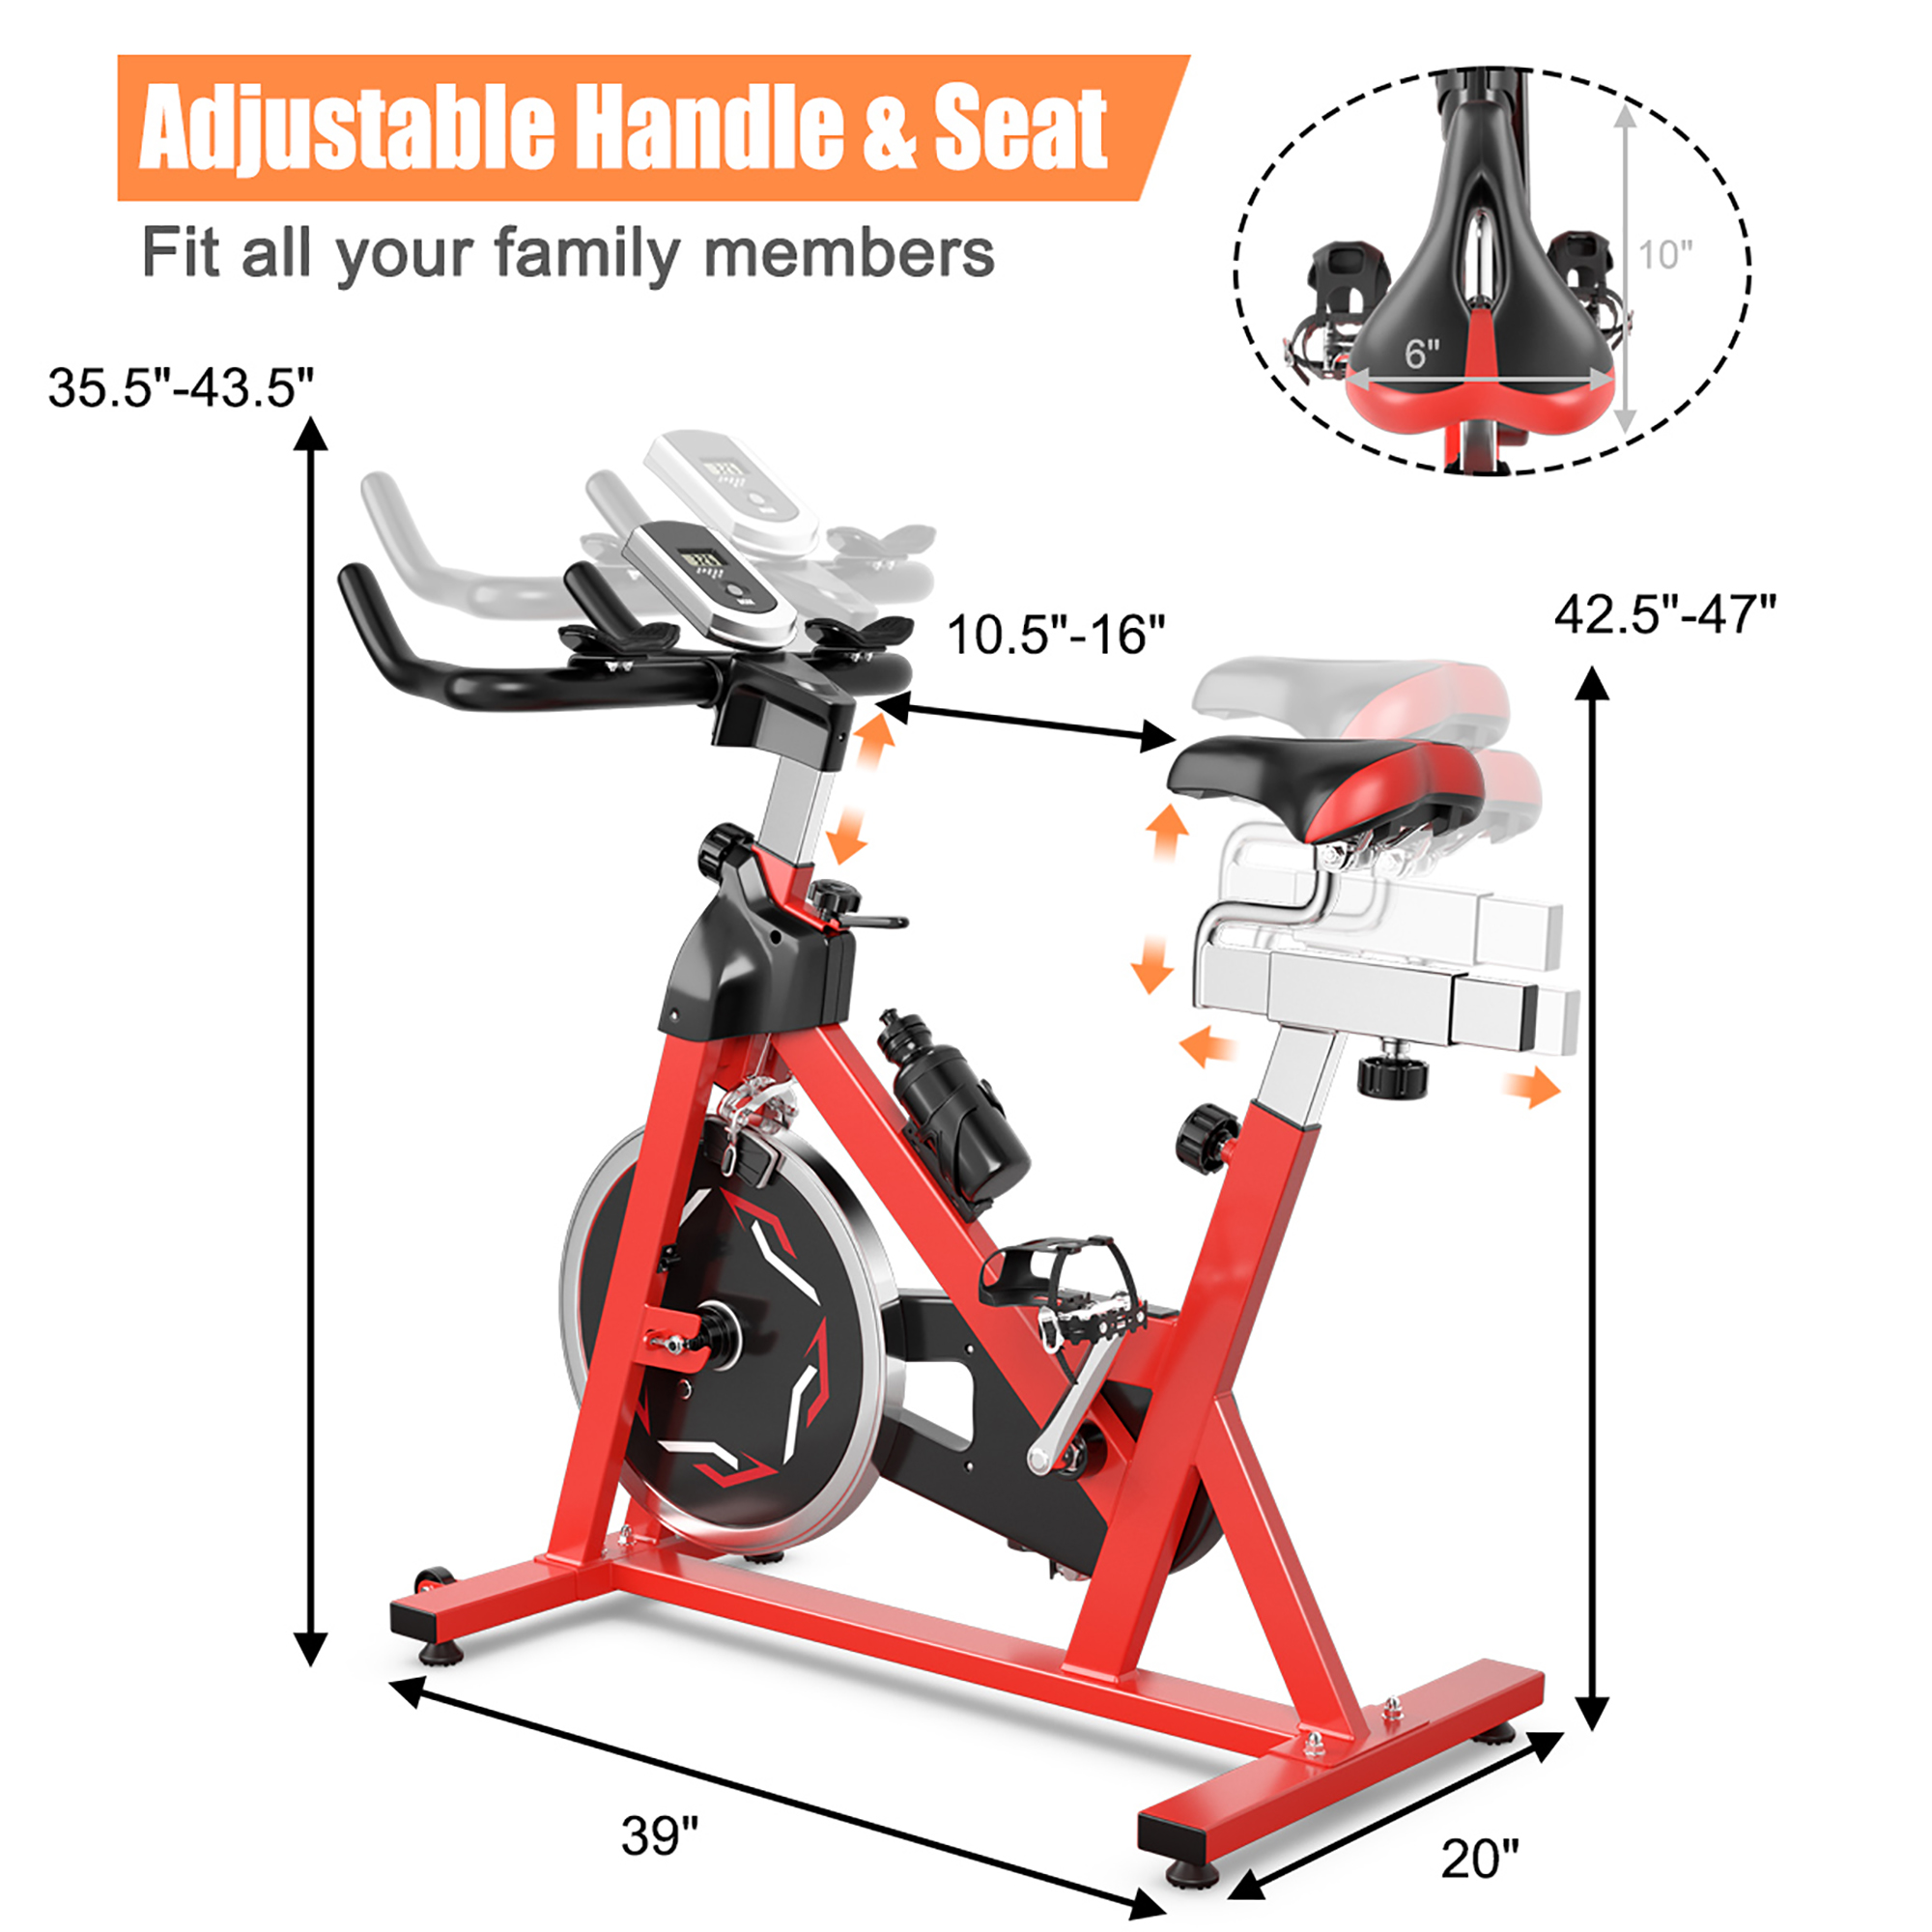 Costway Goplus Stationary Indoor Fitness Cycling Bik w/ LCD Monitor Red